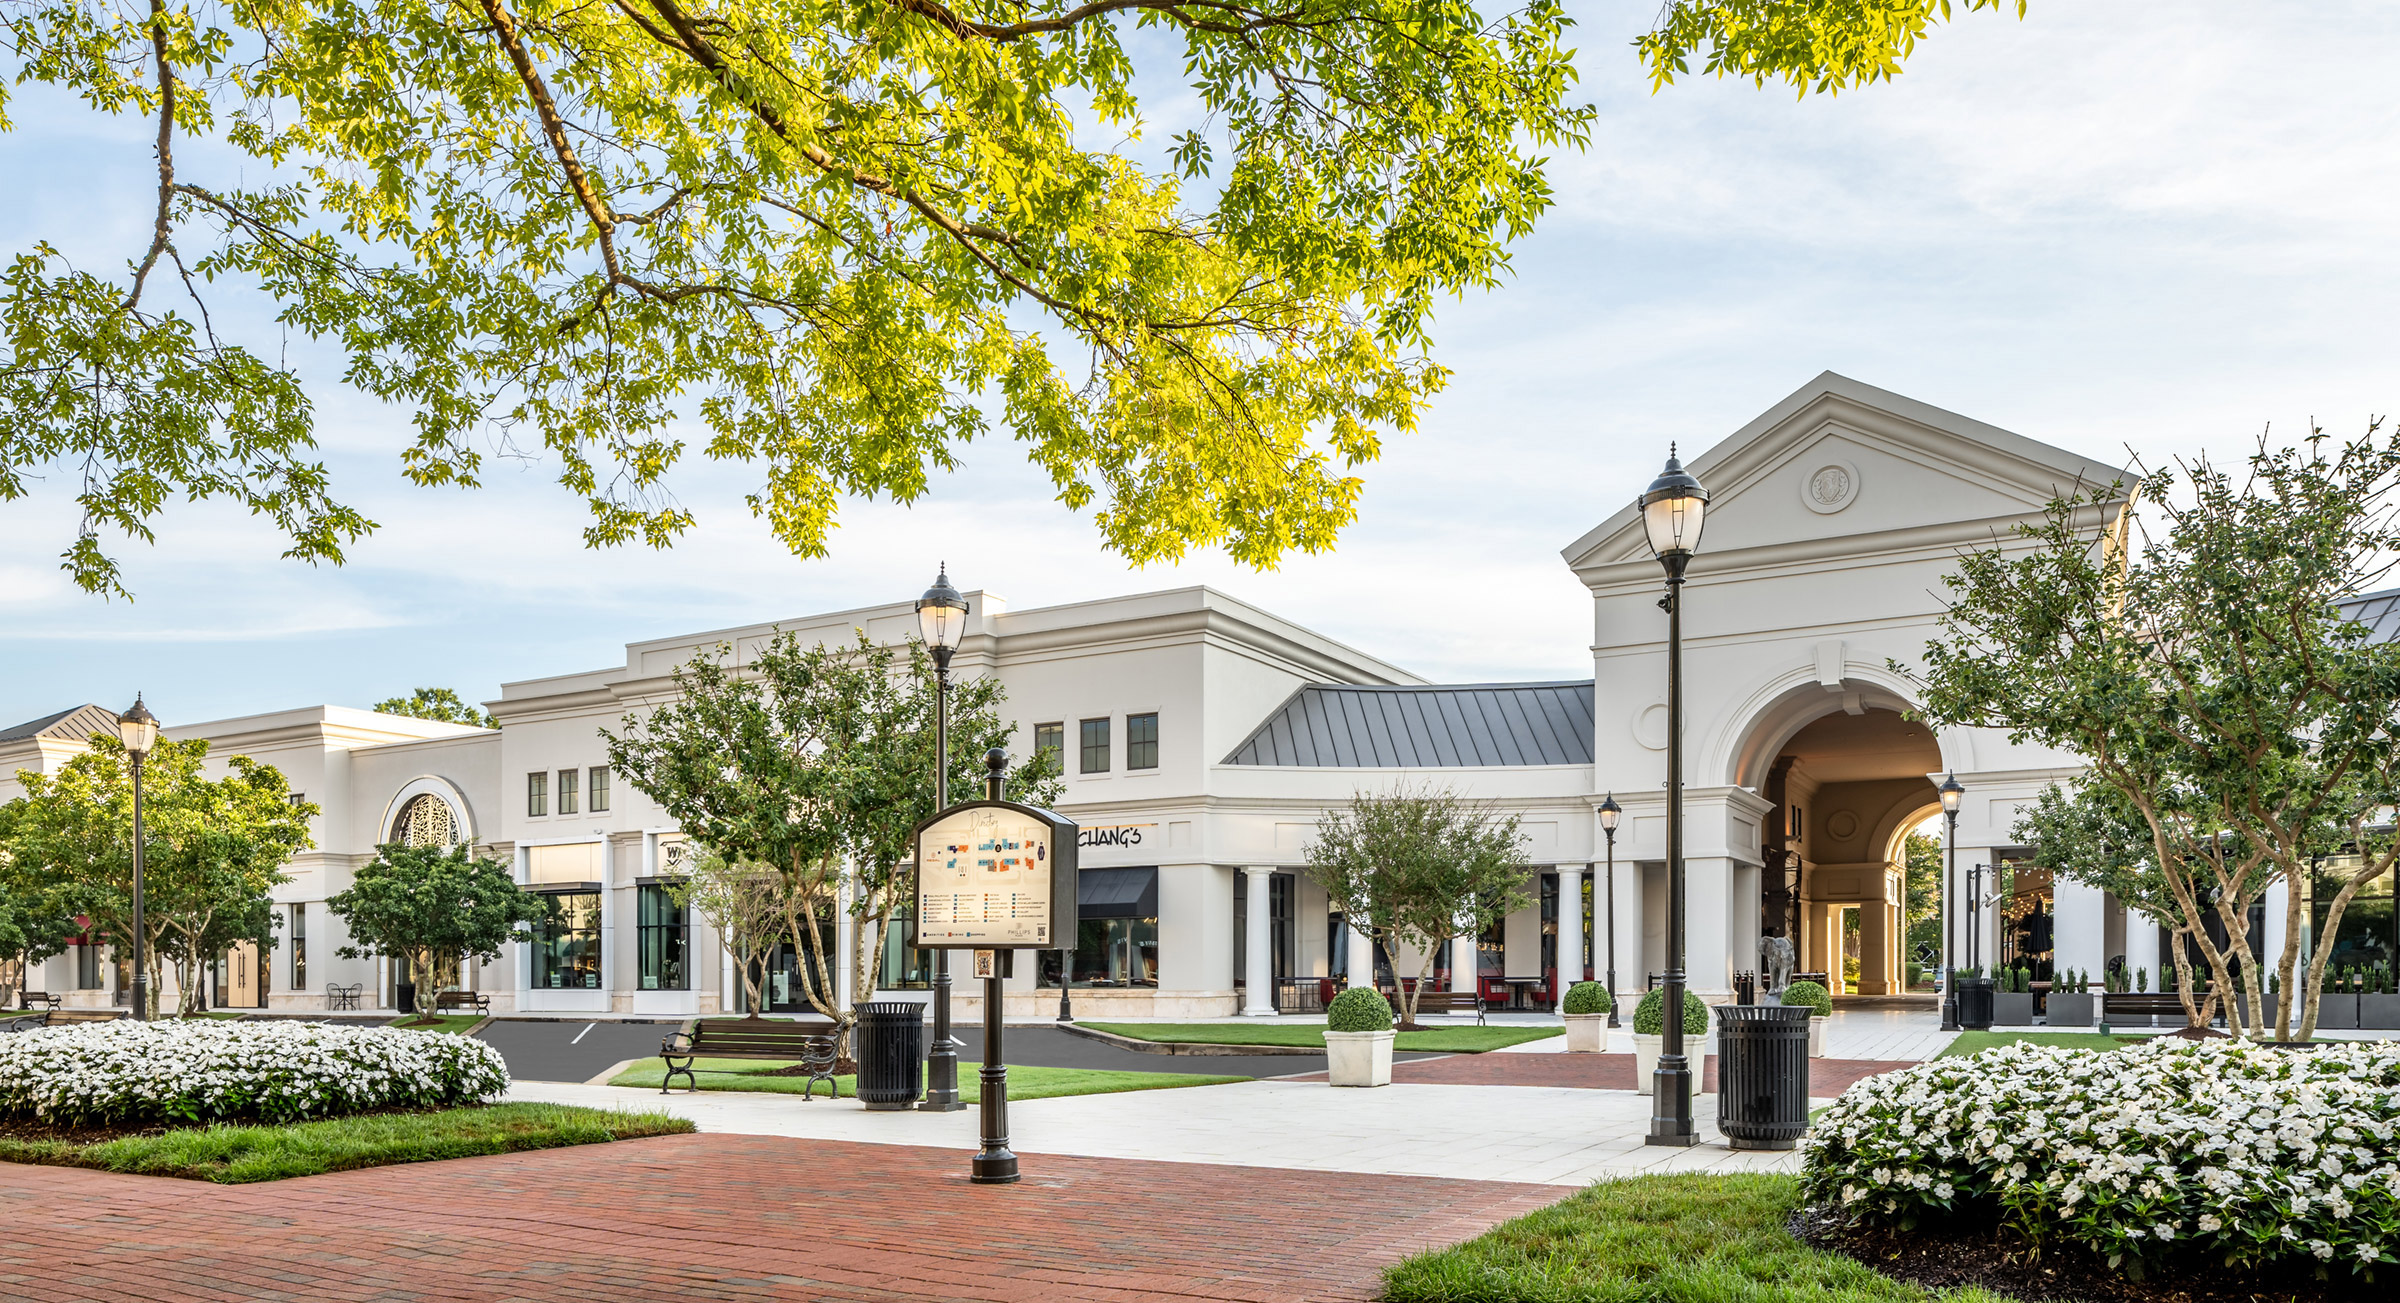 Phillips Place is an open-air shopping and dining destination located in the SouthPark neighborhood in Charlotte, NC.